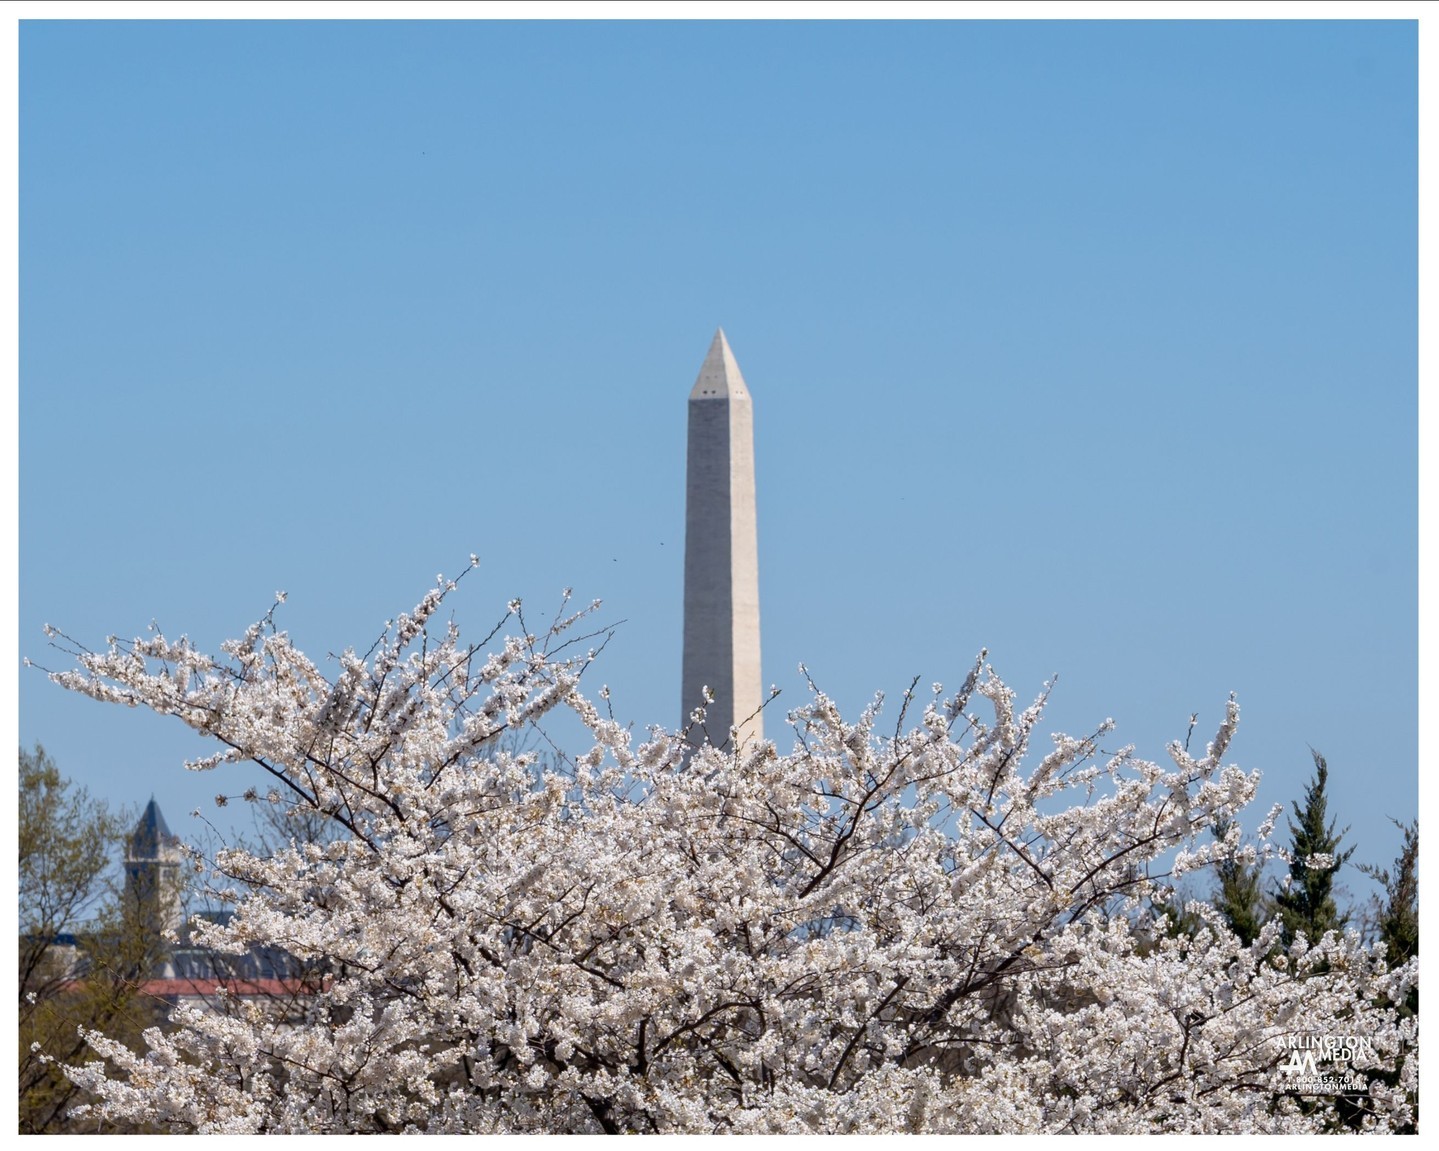 A view of The Washington Monument from Arlington National Cemetery during Cherry Blossom season here in the Northern Virginia/DC Region.

PC: @arlingtonmedia